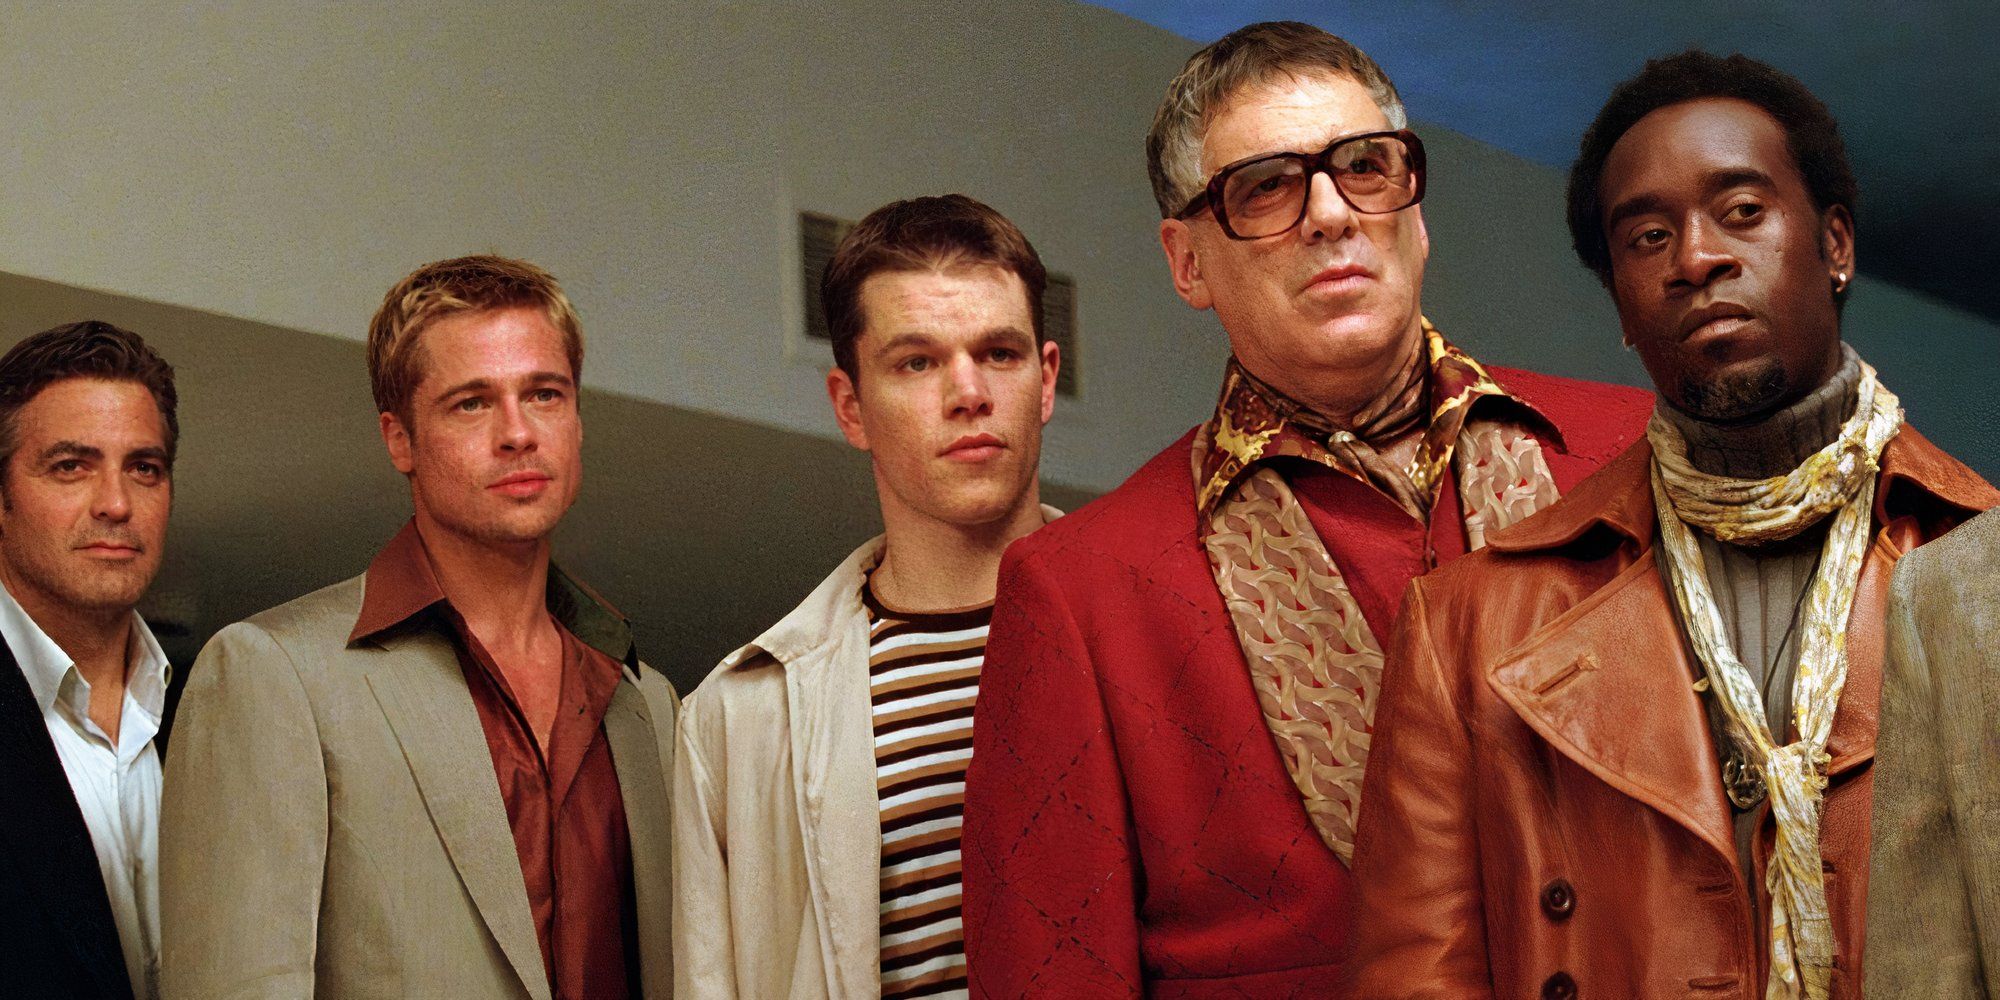 The cast of Ocean's Eleven standing in line and looking in the same direction.